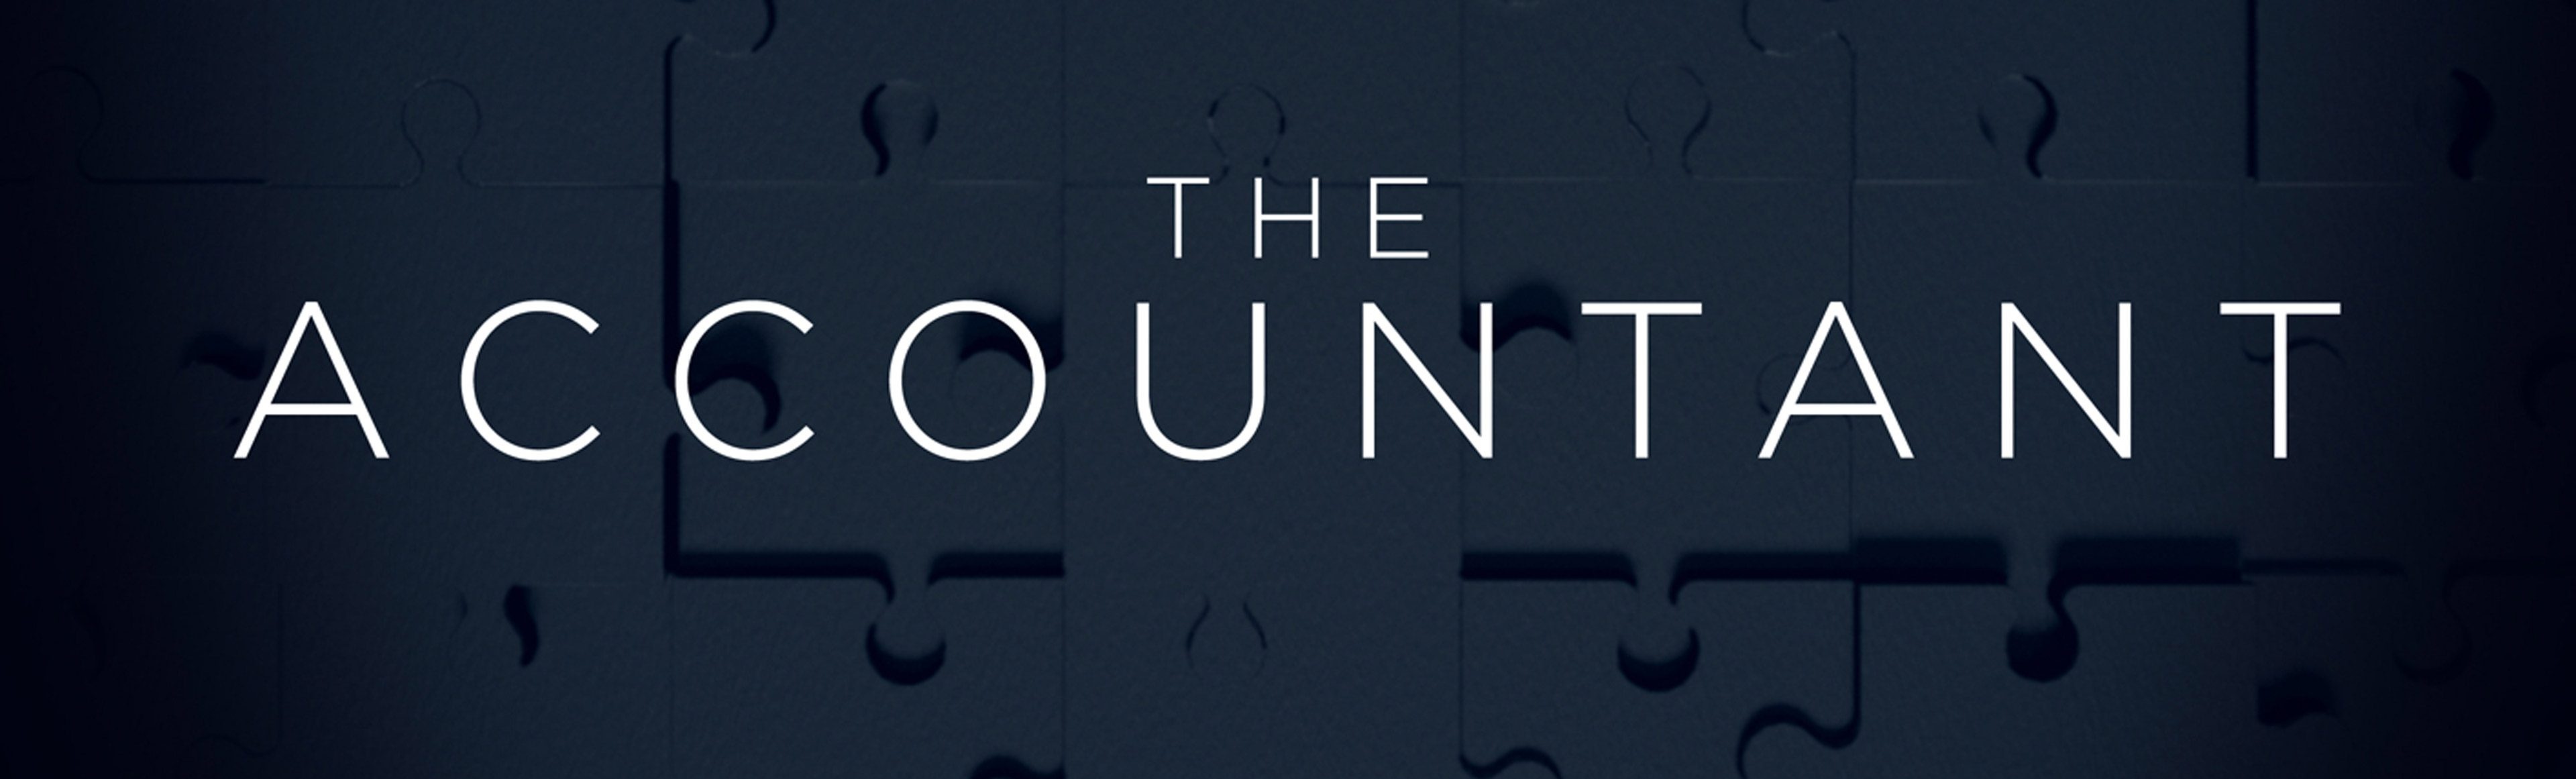 The Accountant Movie, Compelling review, Behind-the-scenes insights, Jason's perspective, 3840x1170 Dual Screen Desktop